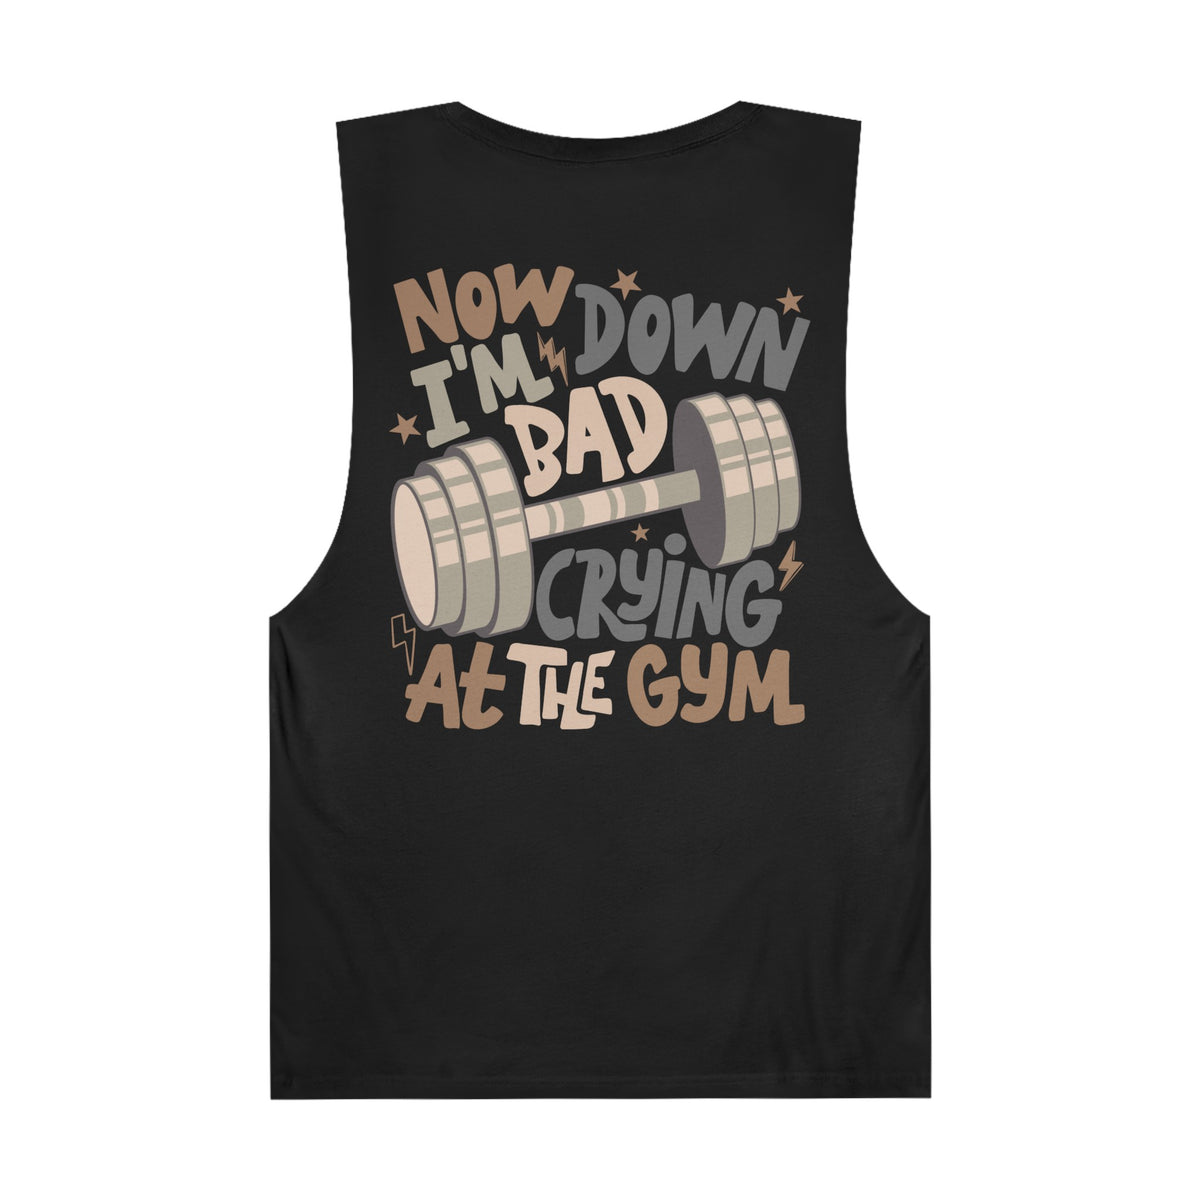 Down Bad Crying at the Gyn AS Colour Unisex Barnard Tank